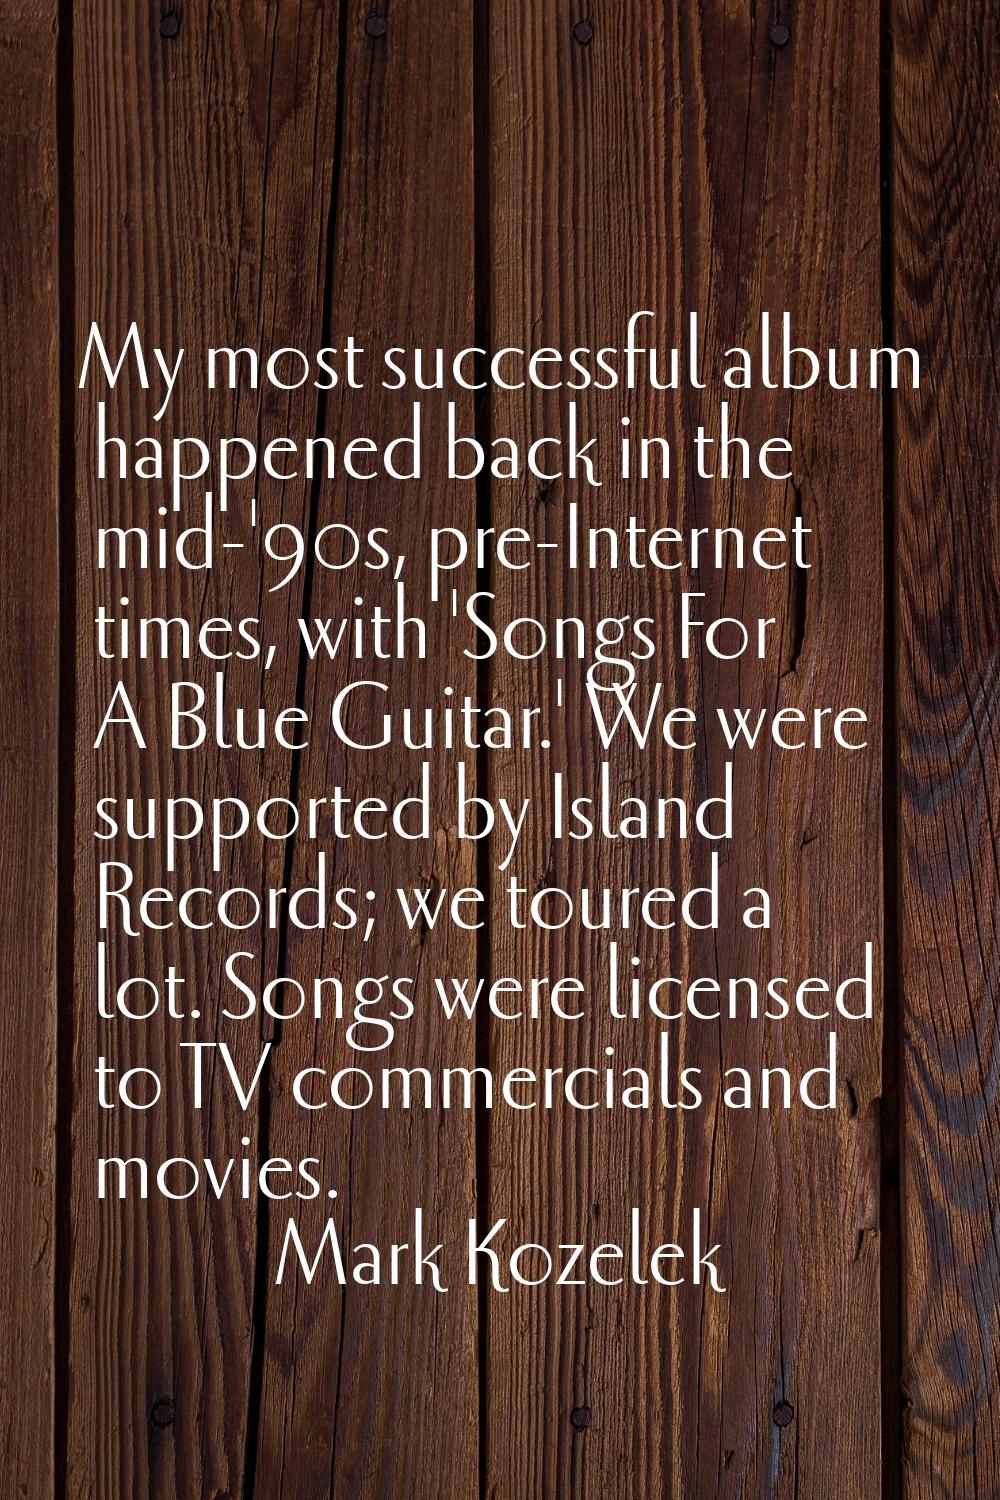 My most successful album happened back in the mid-'90s, pre-Internet times, with 'Songs For A Blue 